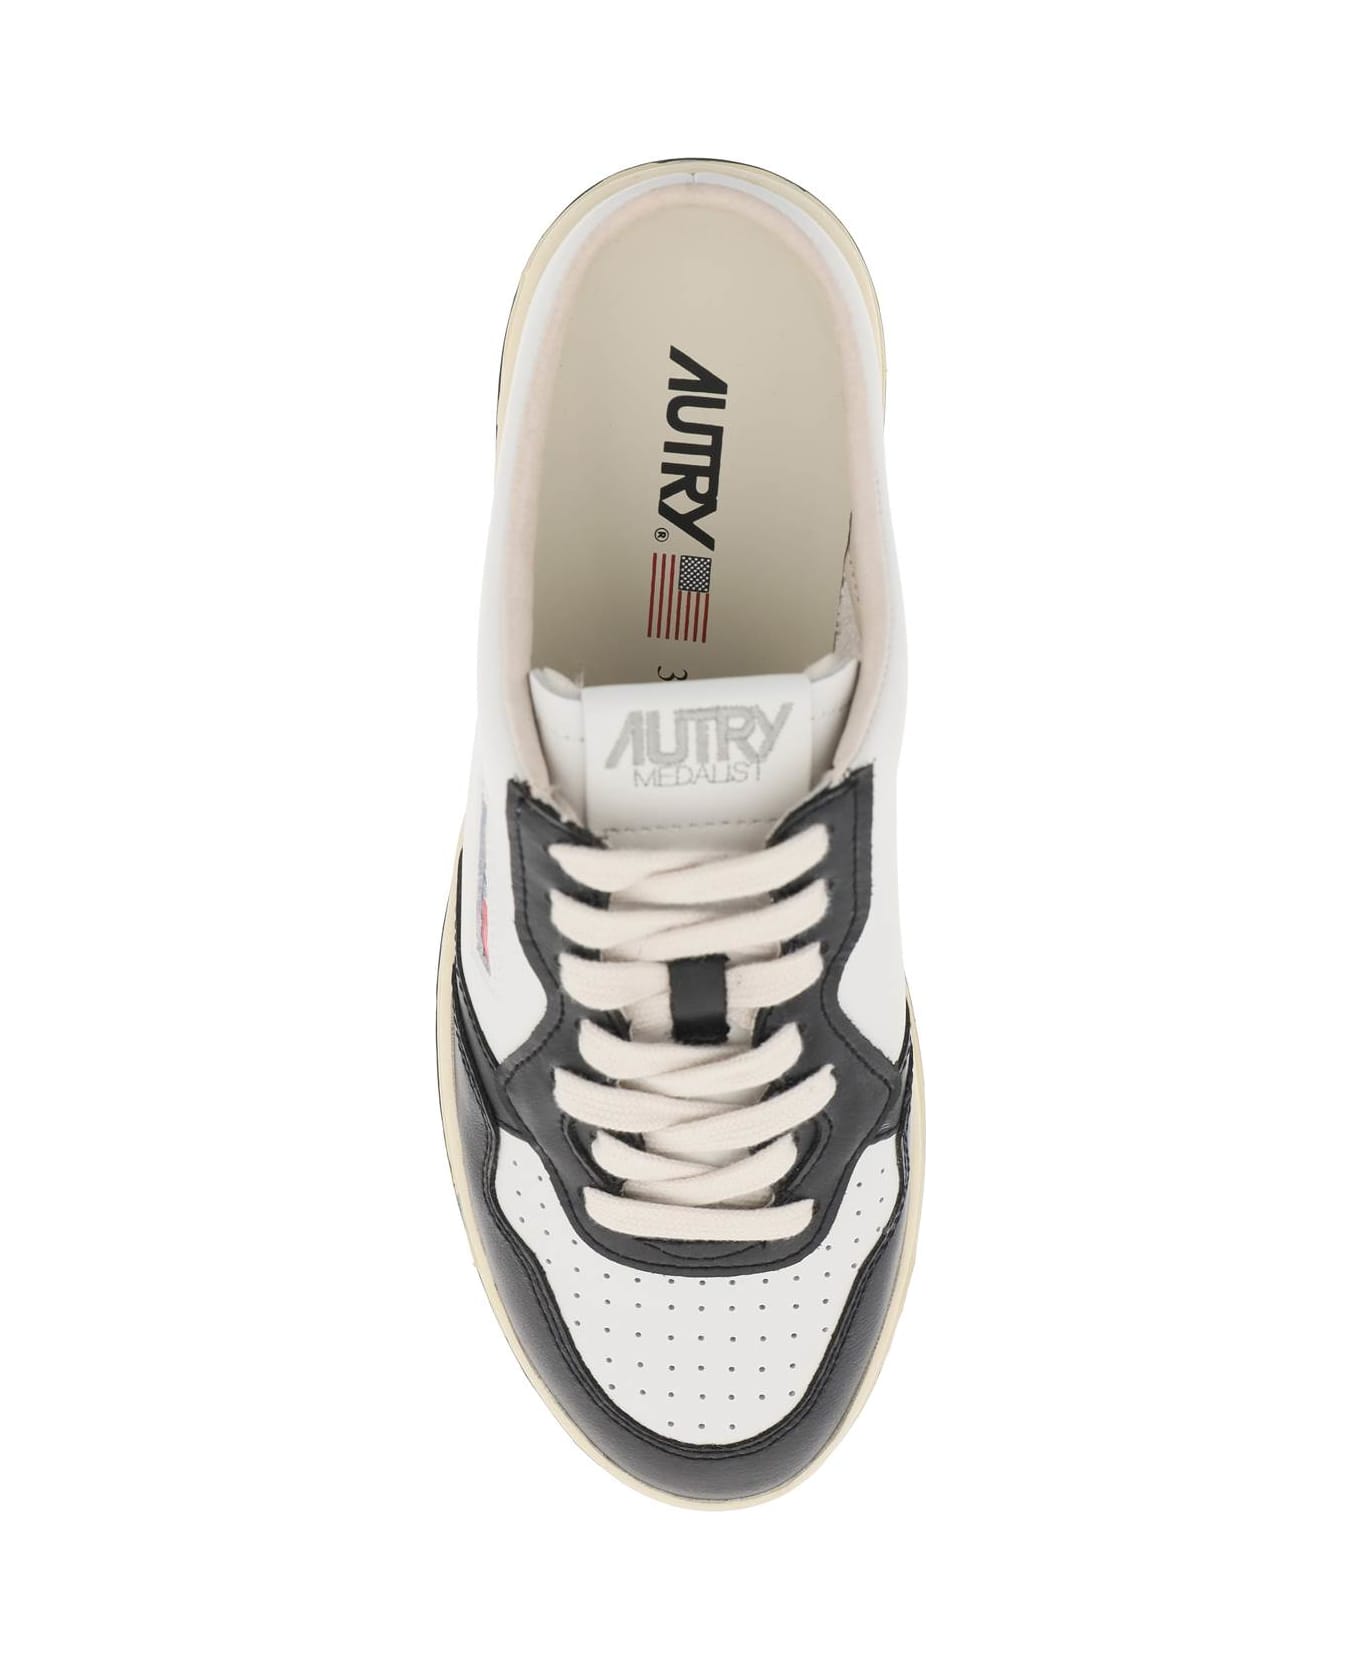 Autry Medalist Mule Low Sneakers - WHITE BLACK (White)